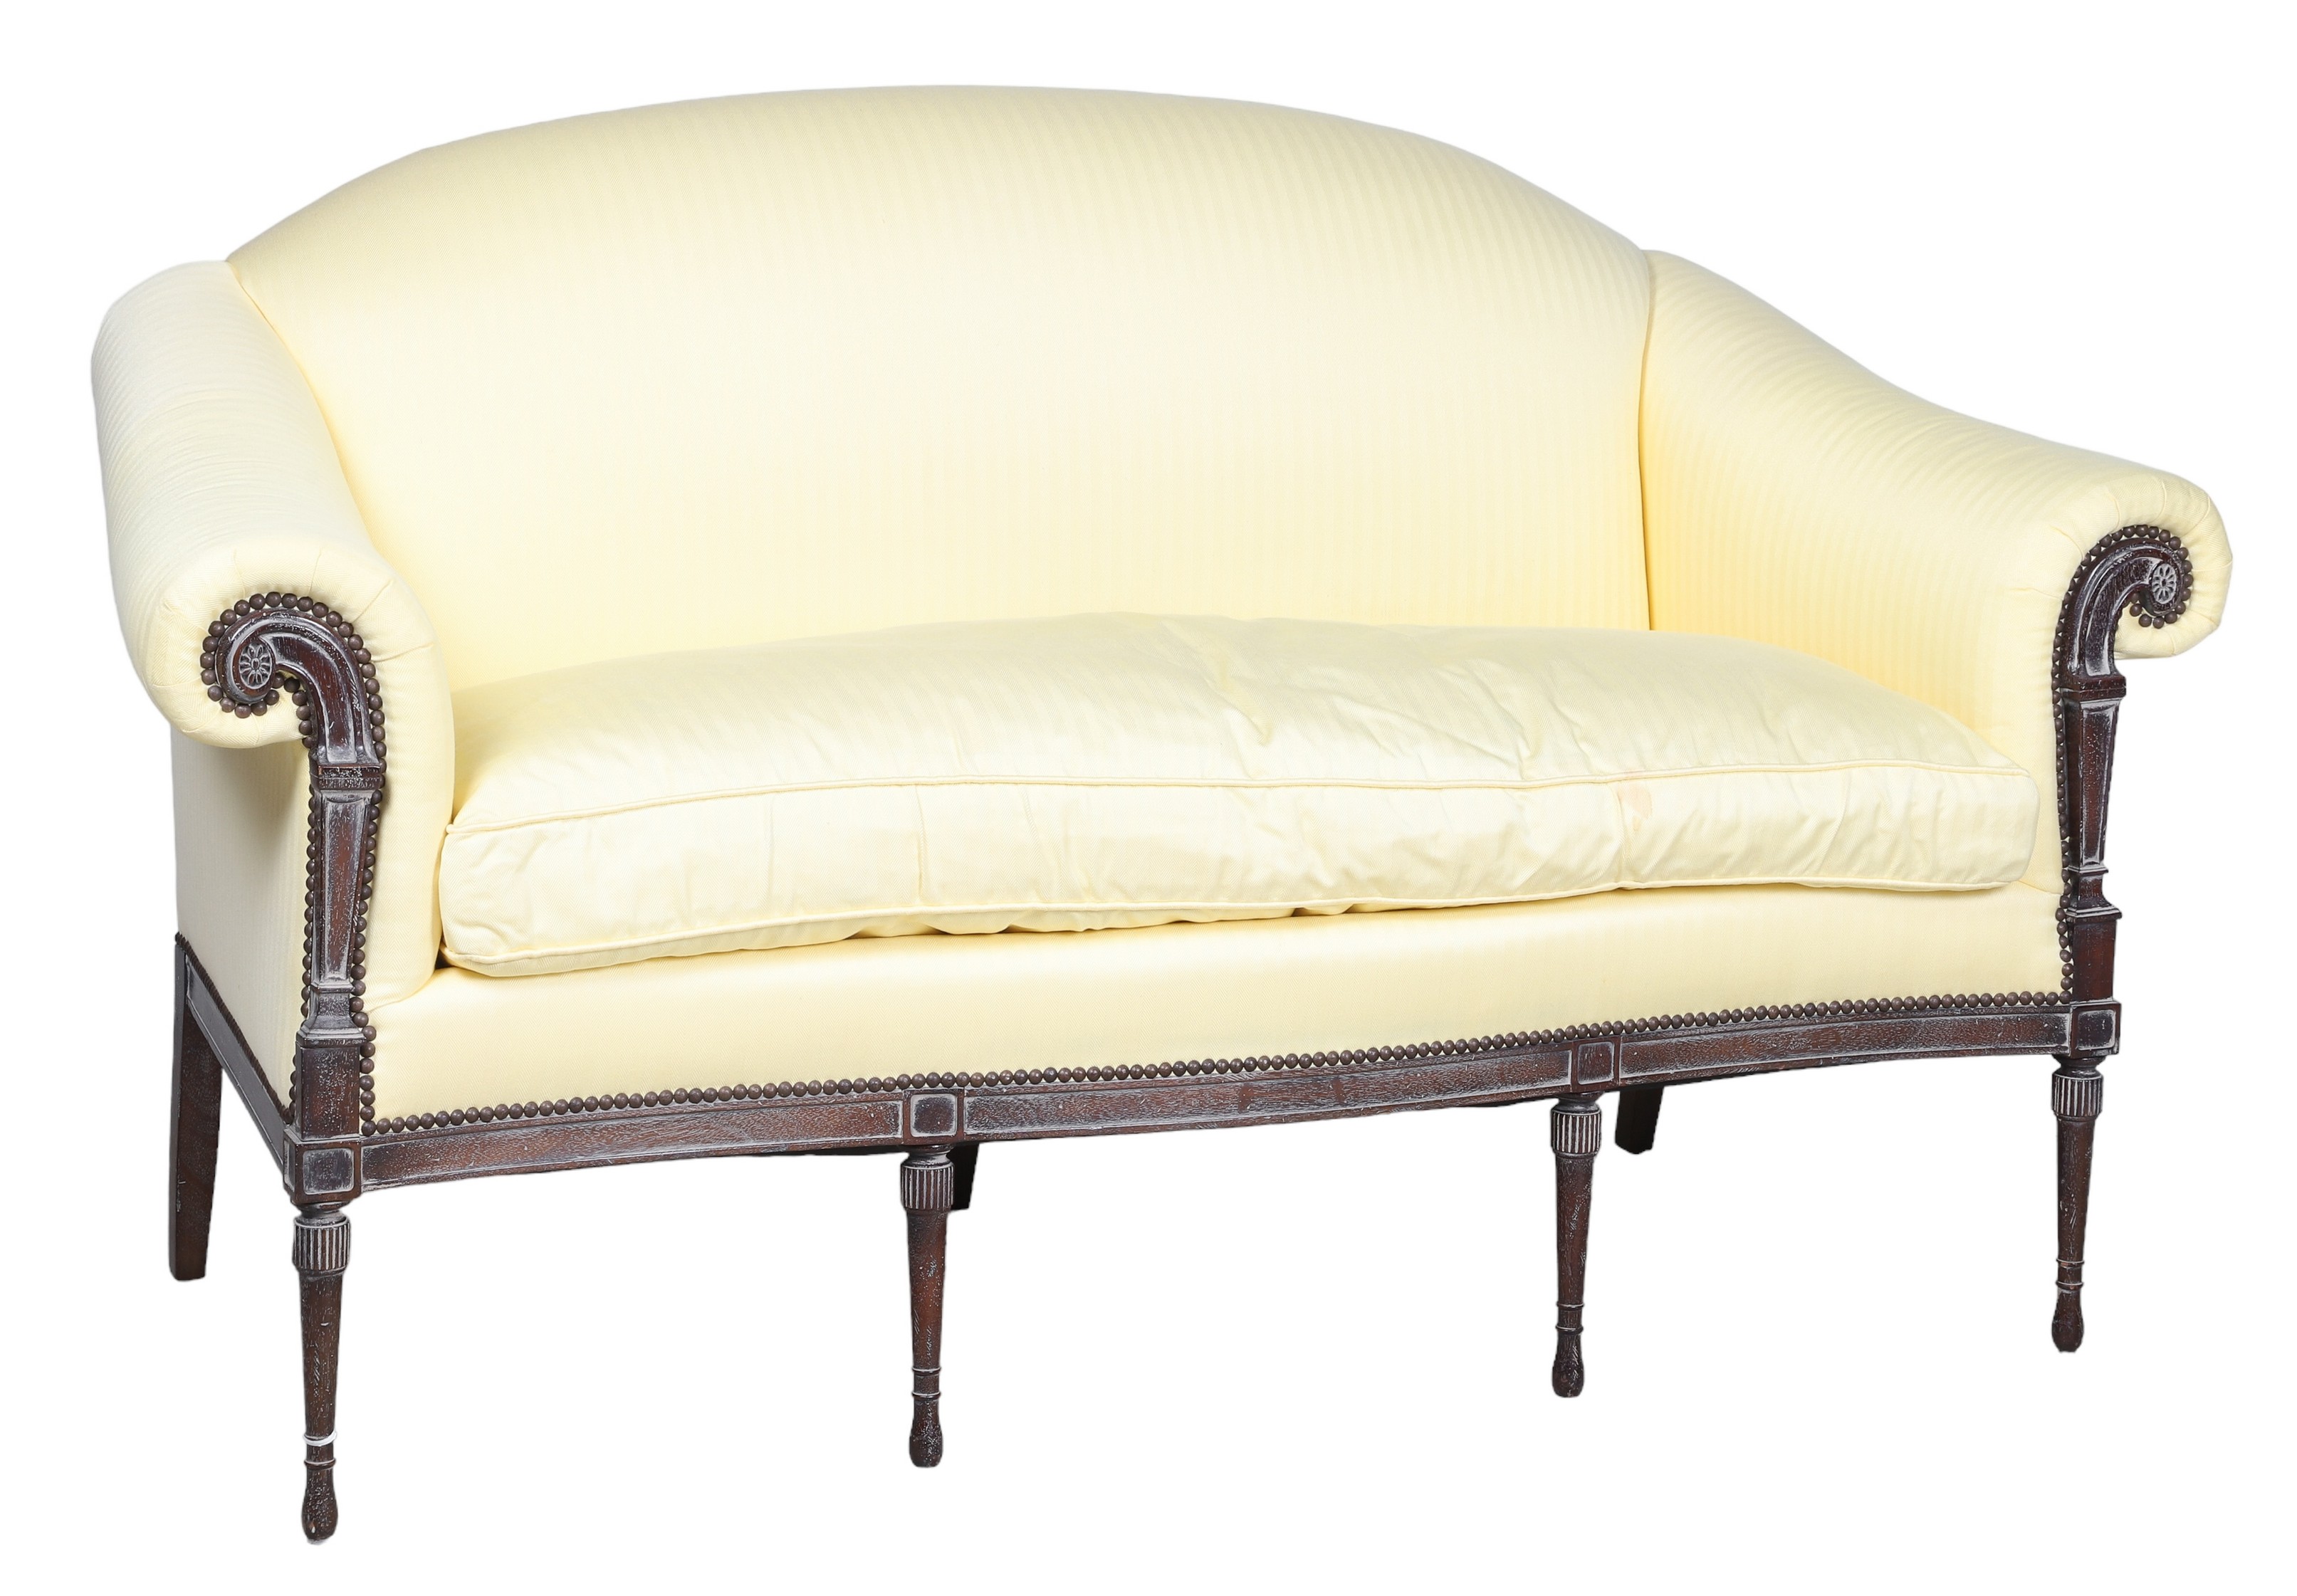 EJ Victor upholstered settee, yellow